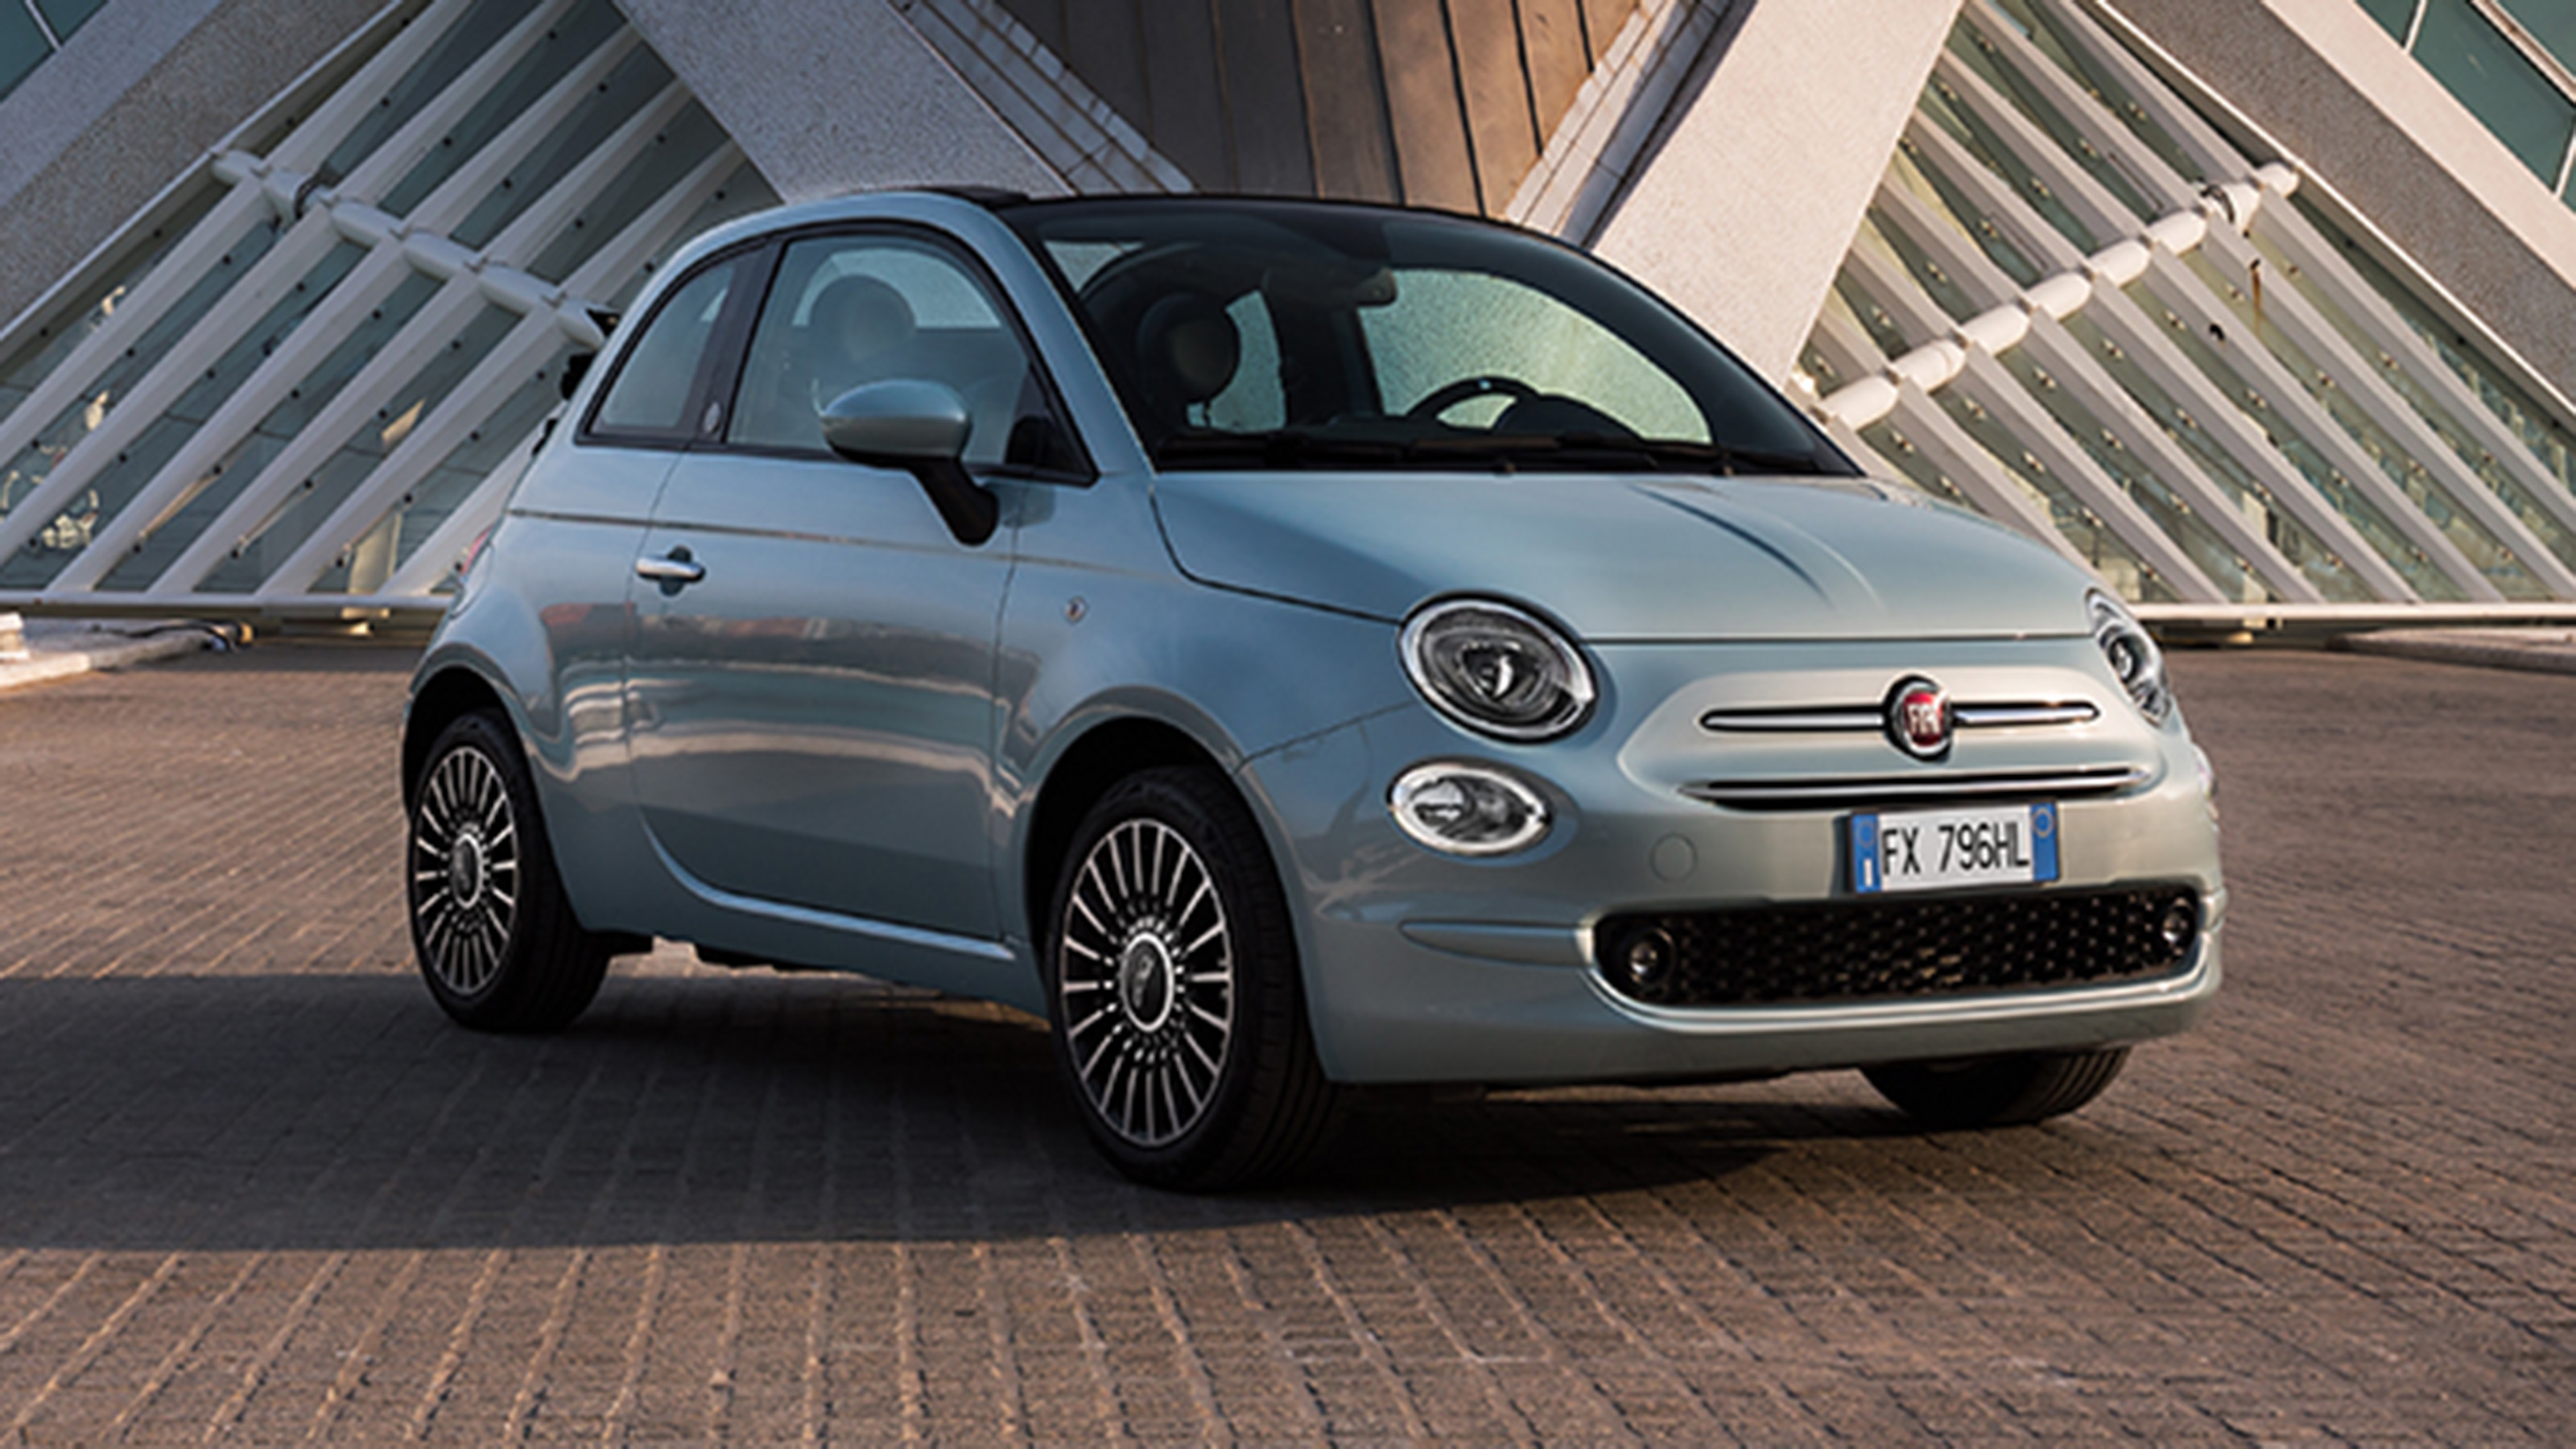 Fiat 500 C is convertible version of the Fiat 500 city car with a a  full-length sunroof. Fiat 500 C interior close up on driver's seat,  steering wheel and gauges. foto de